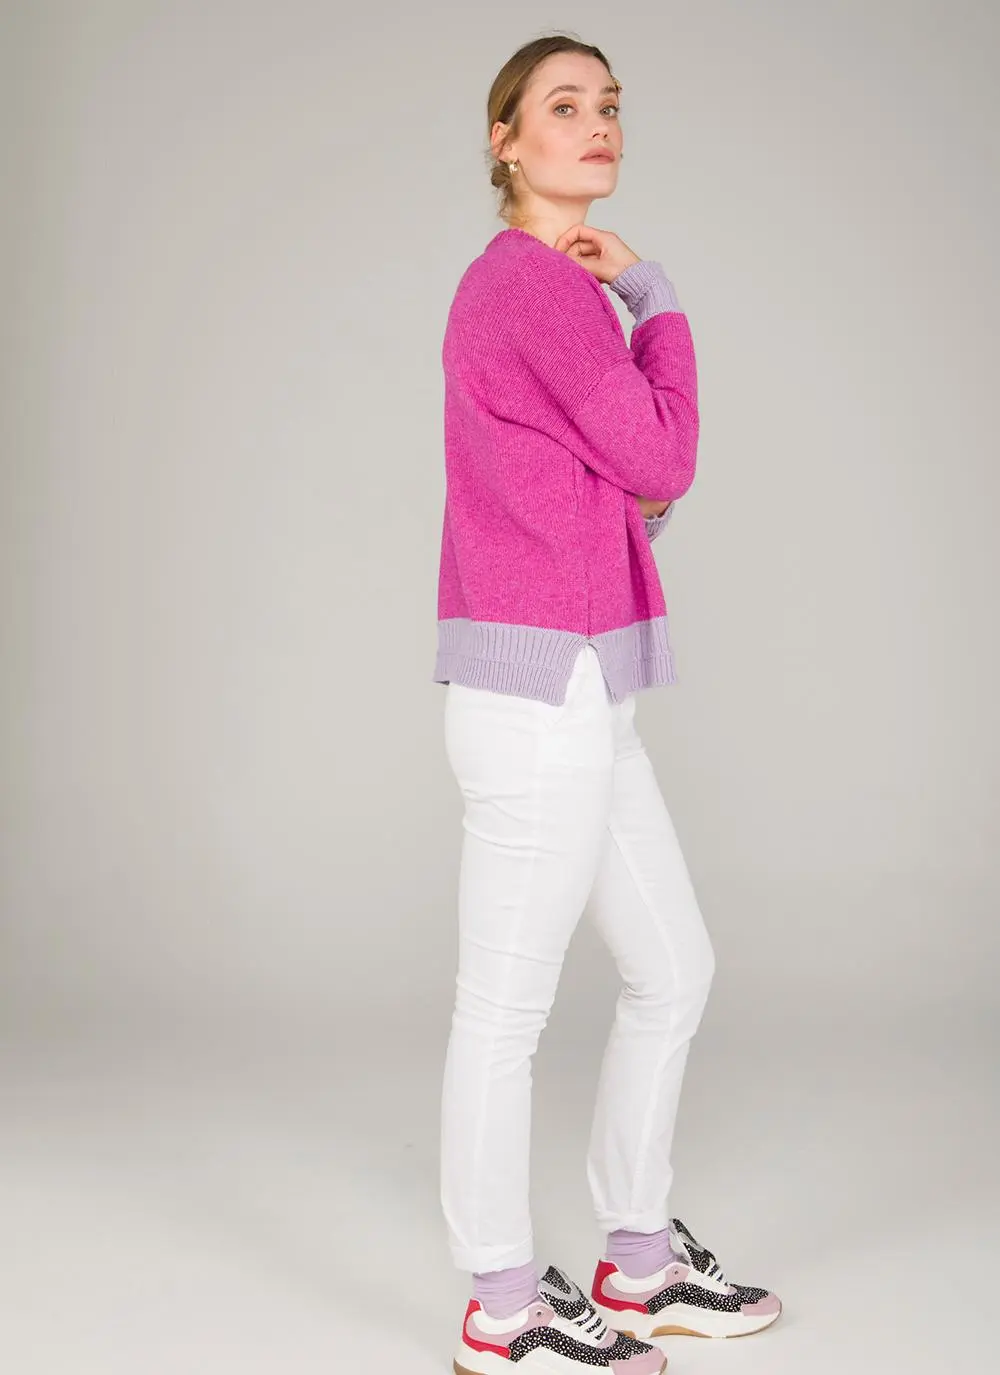 The Bright Ultra Contrast Sweater